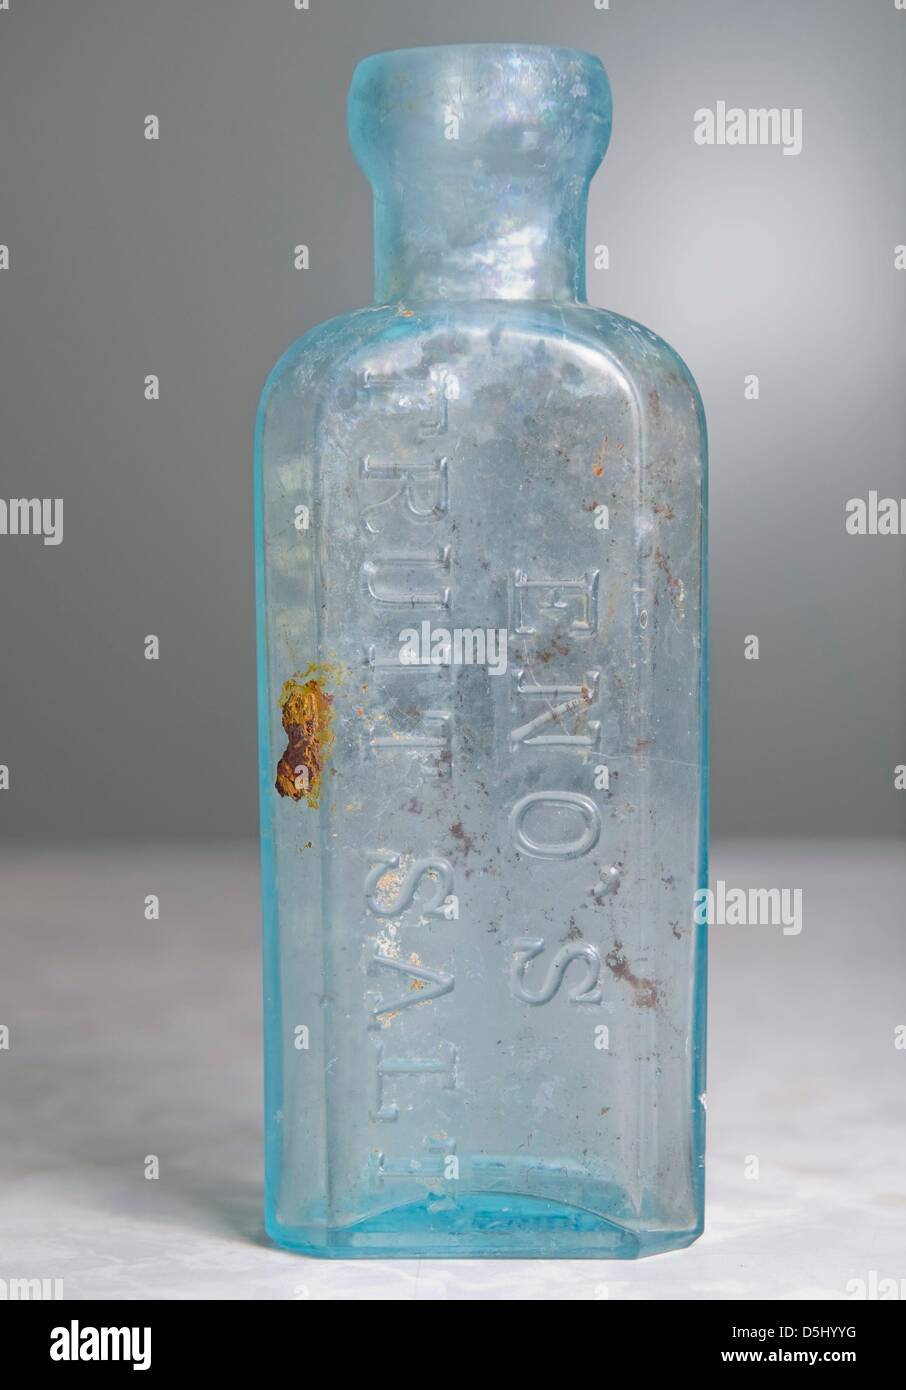 JOHANNEBSURG, SOUTH AFRICA: A newly excavated bottle on March 28, 2013, in Johannesburg, South Africa.  These bottles were found on the Rand Show grounds and date back almost 100 years. (Photo by Gallo Images / City Press / Herman Verwey) Stock Photo